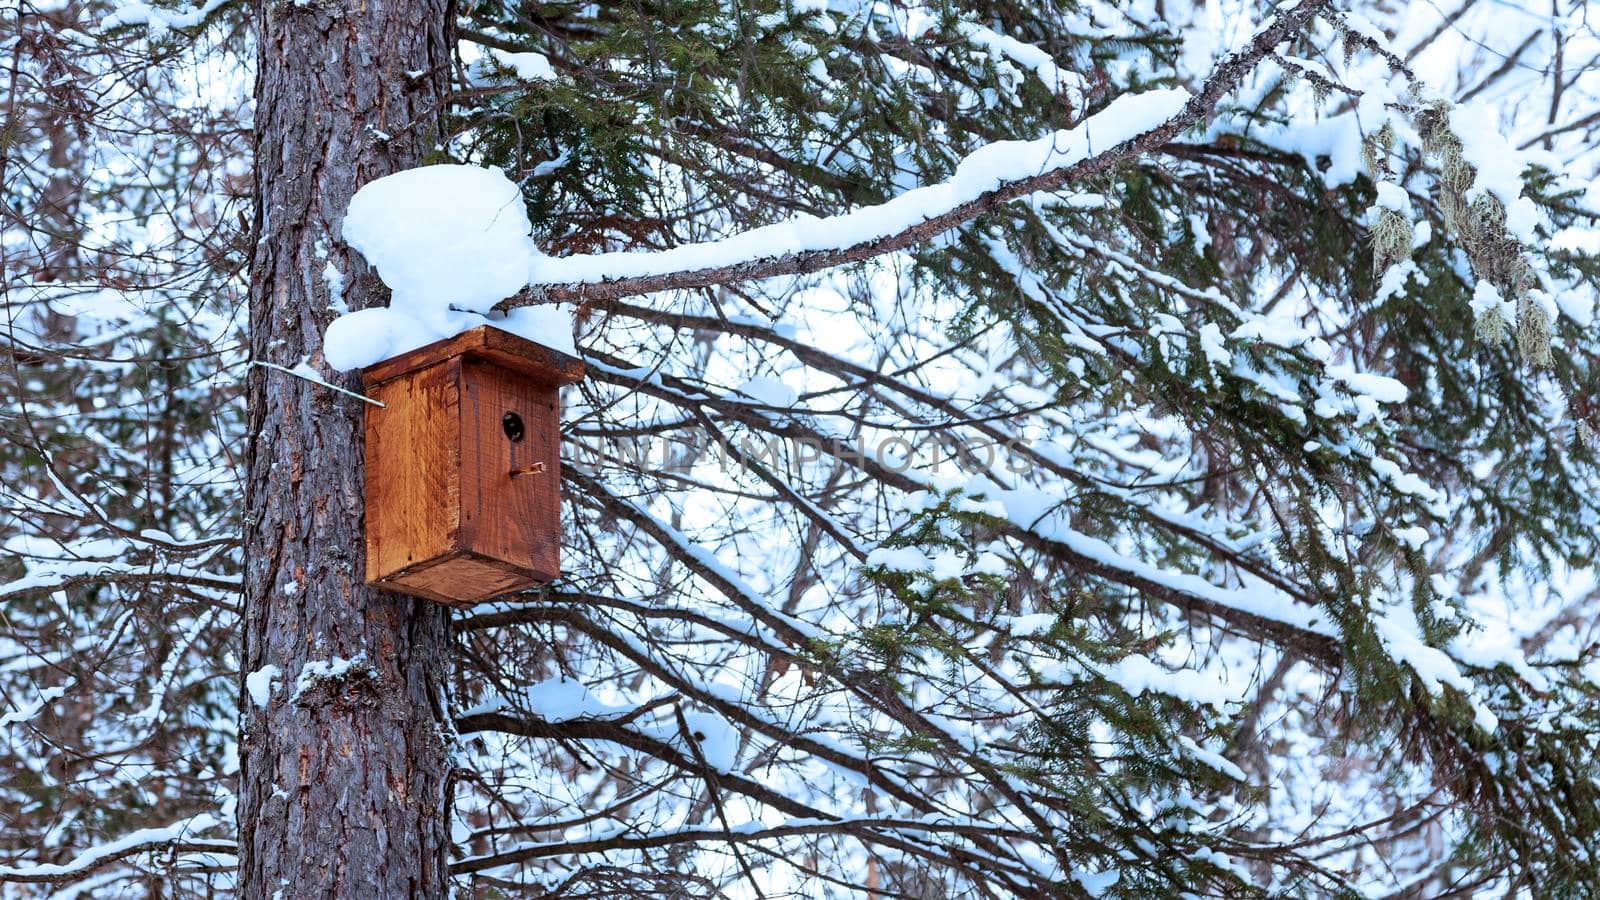 Snowcovered birdhouse on a tree trunk. Winter